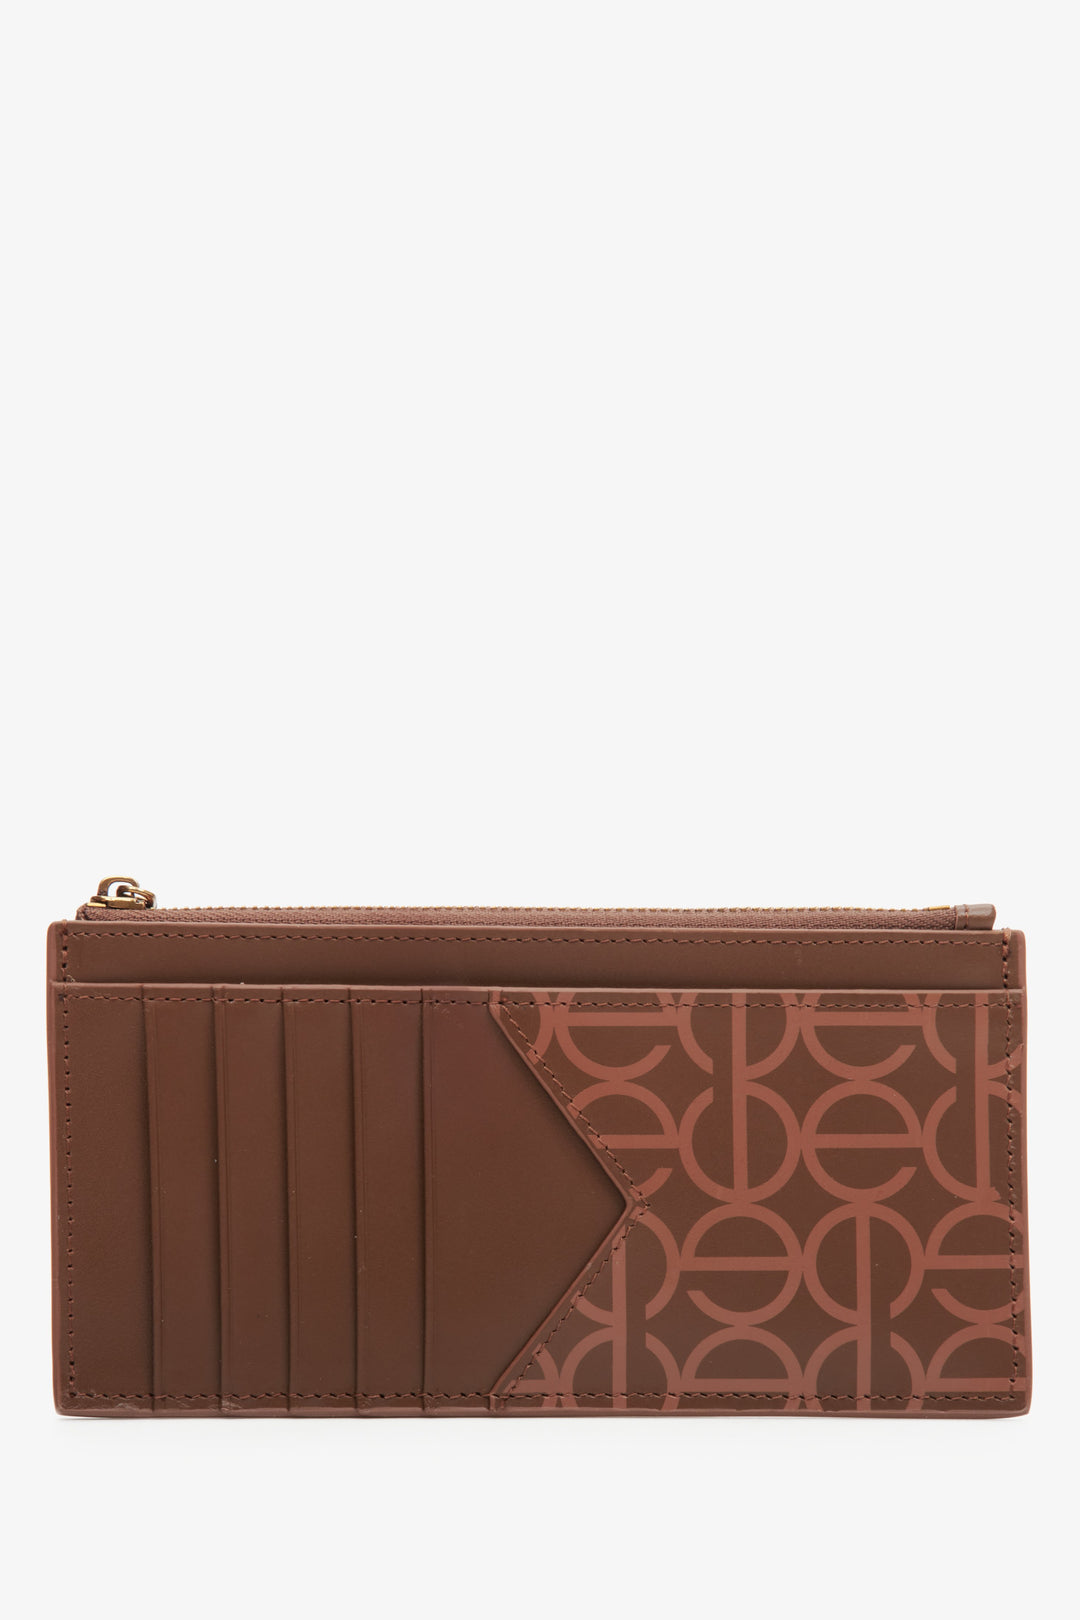 Large brown women's wristlet by Estro, made of genuine leather with golden accents - reverse side.